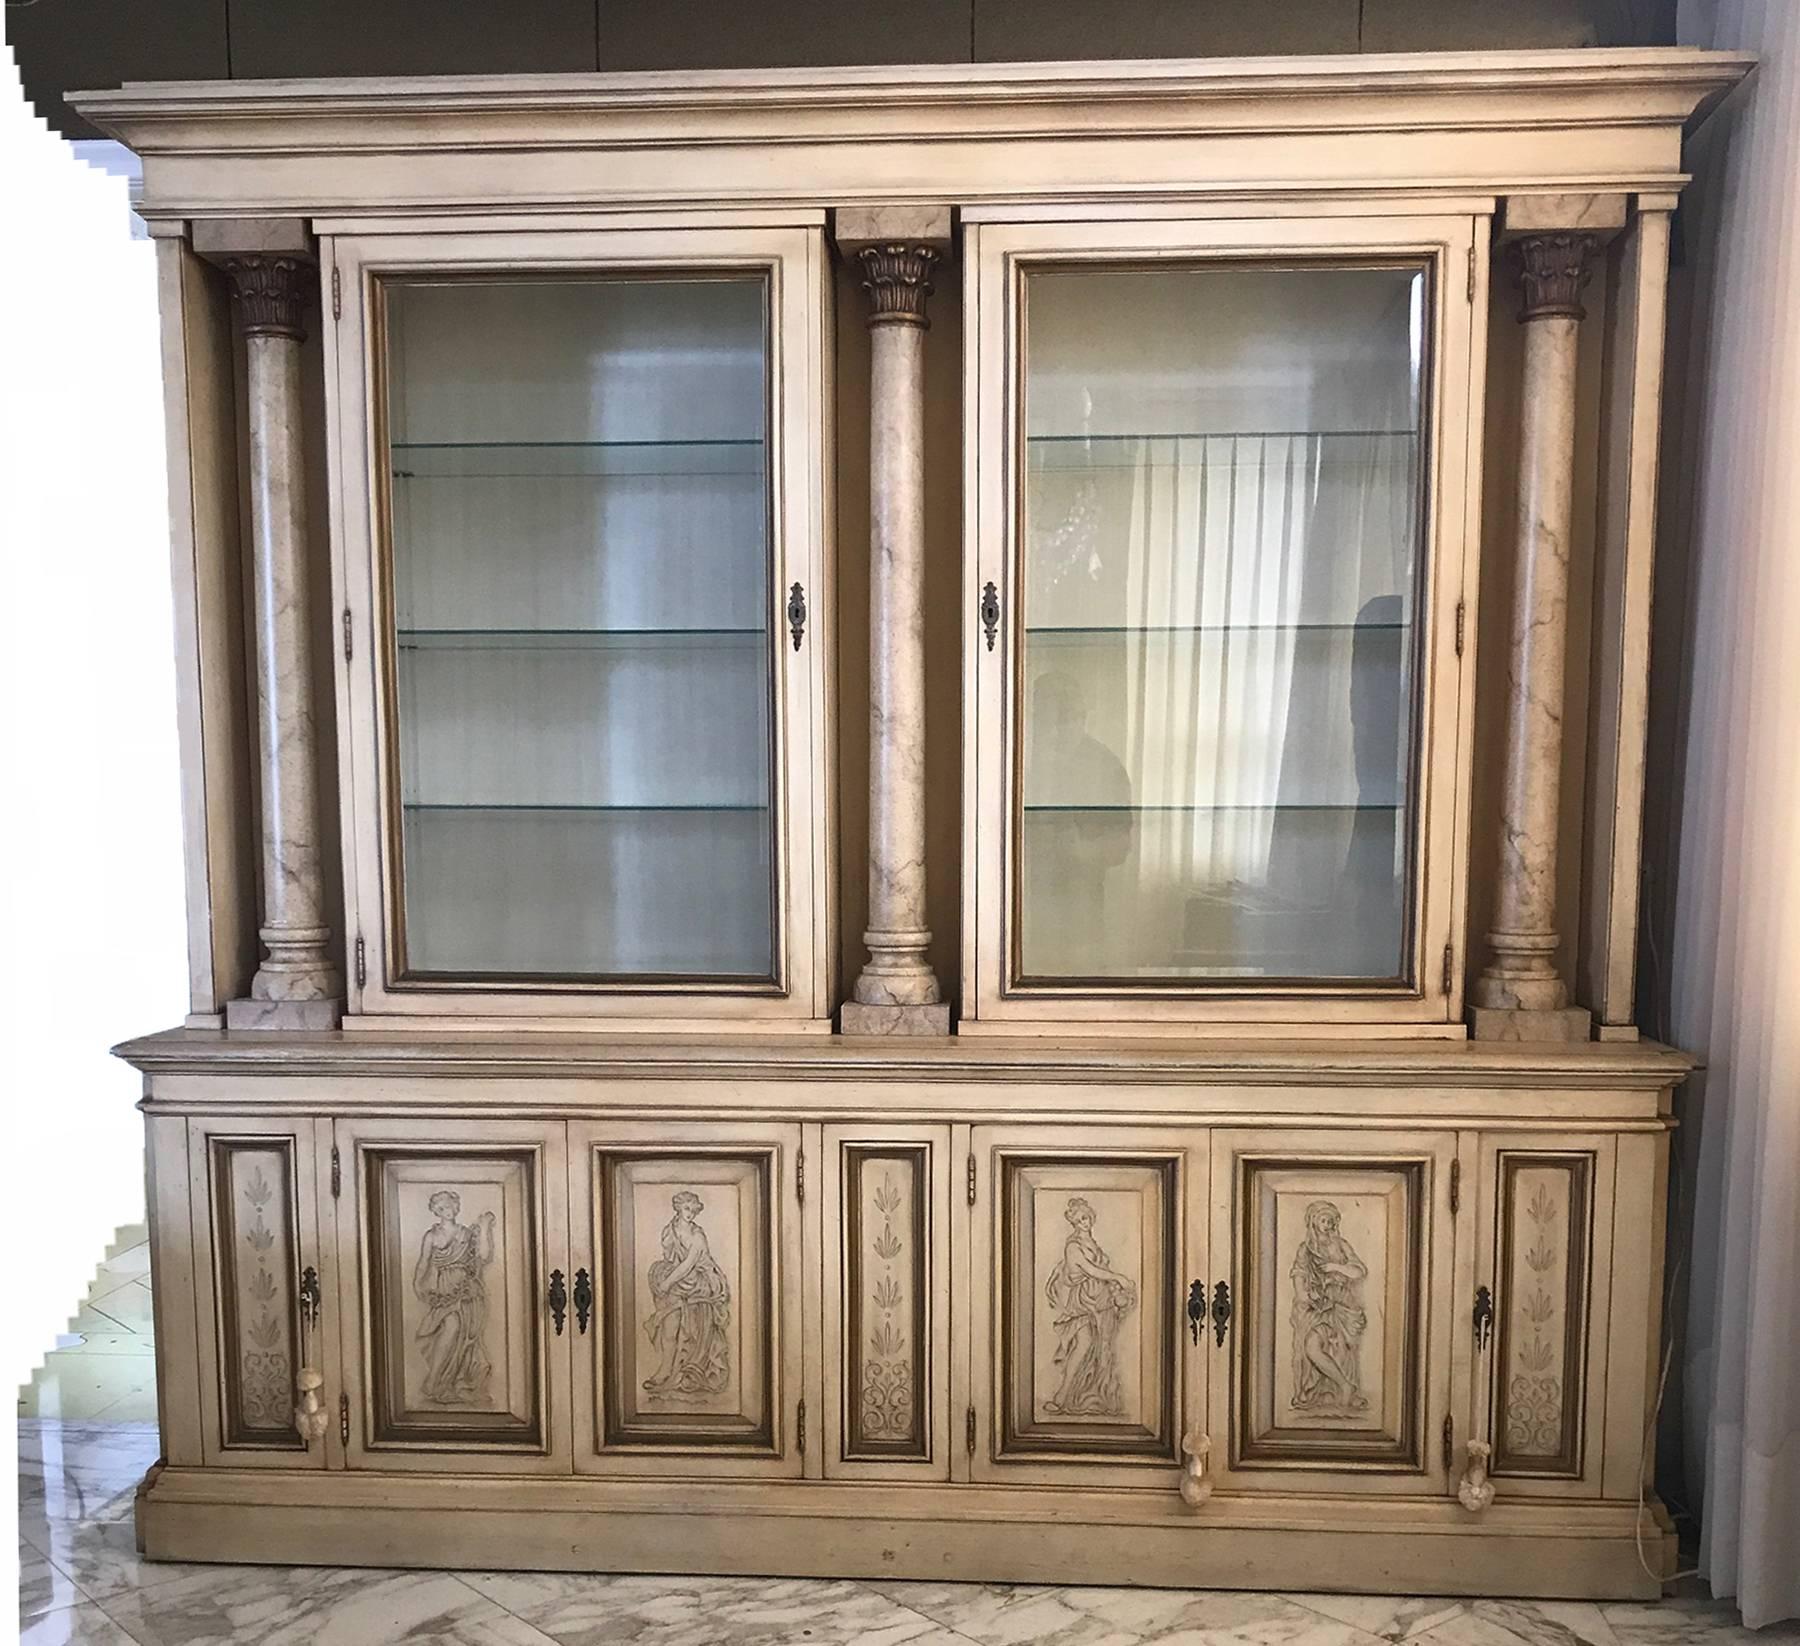 Glass upper cabinets with column decoration with storage drawers below. Tasteful pale painted finish with Venetian scenes. Karges was known for high quality furniture one of the old American furniture companies . Solid wood construction throughout.